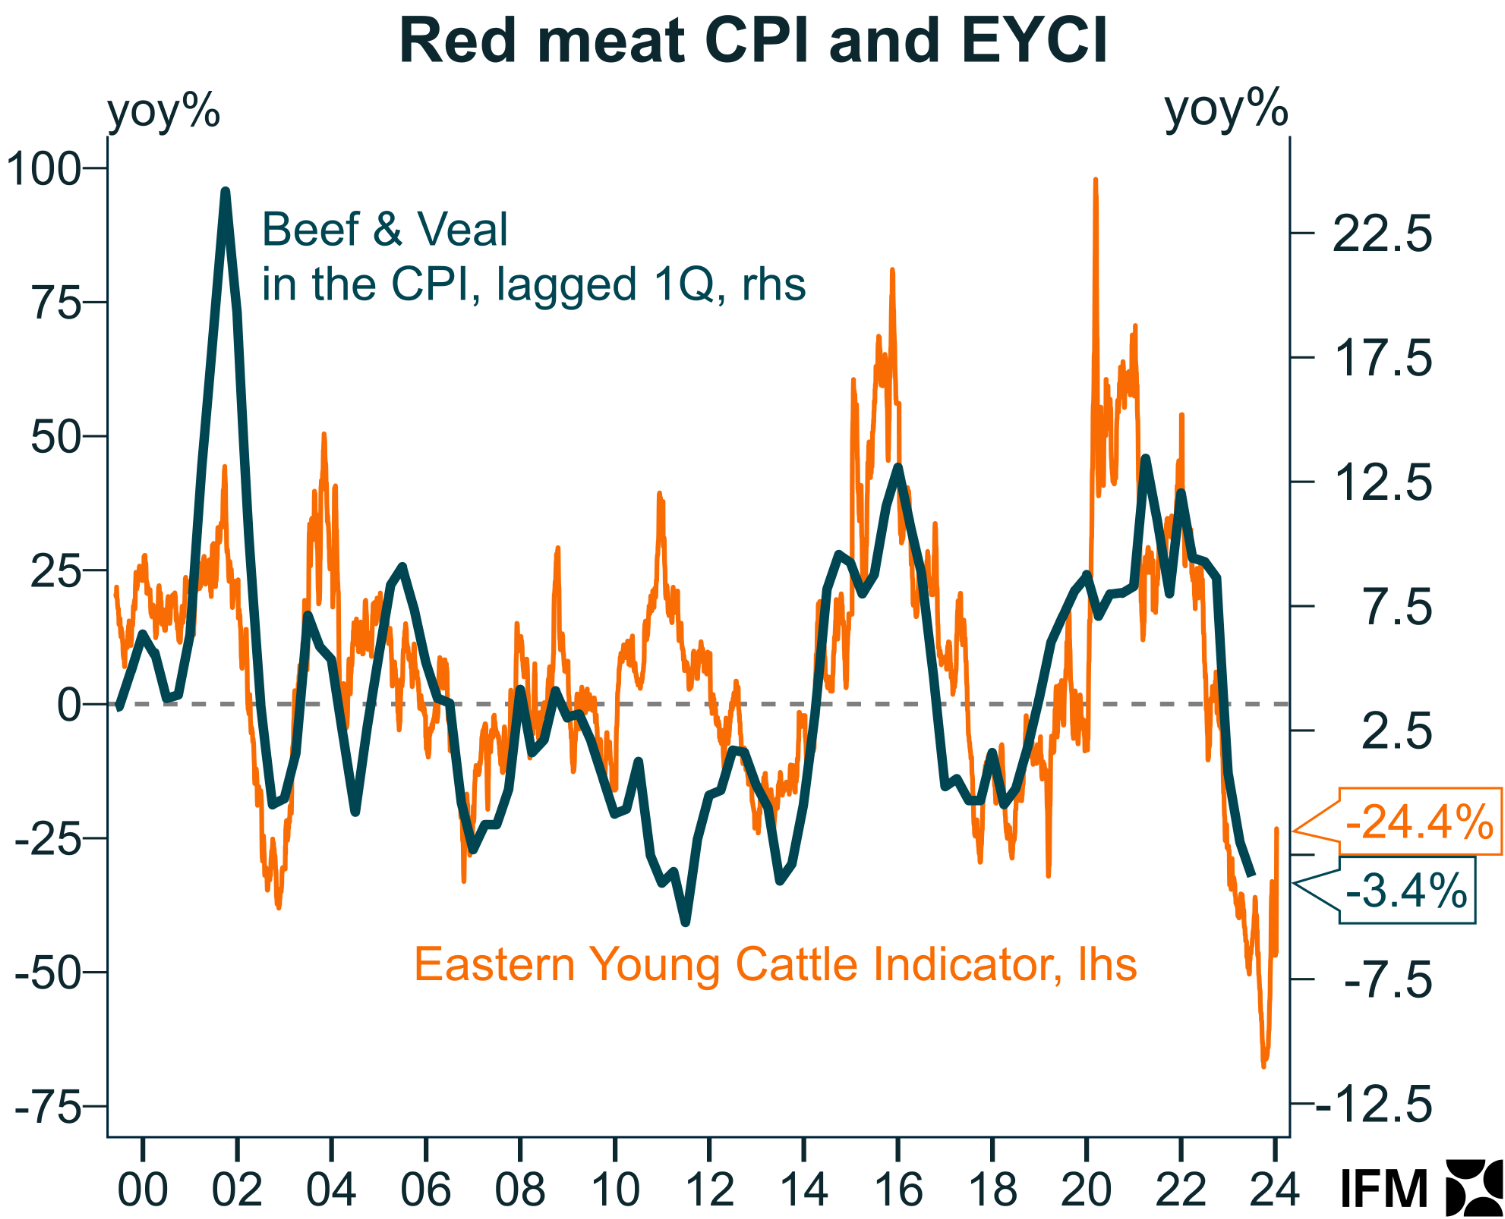 Red meat prices